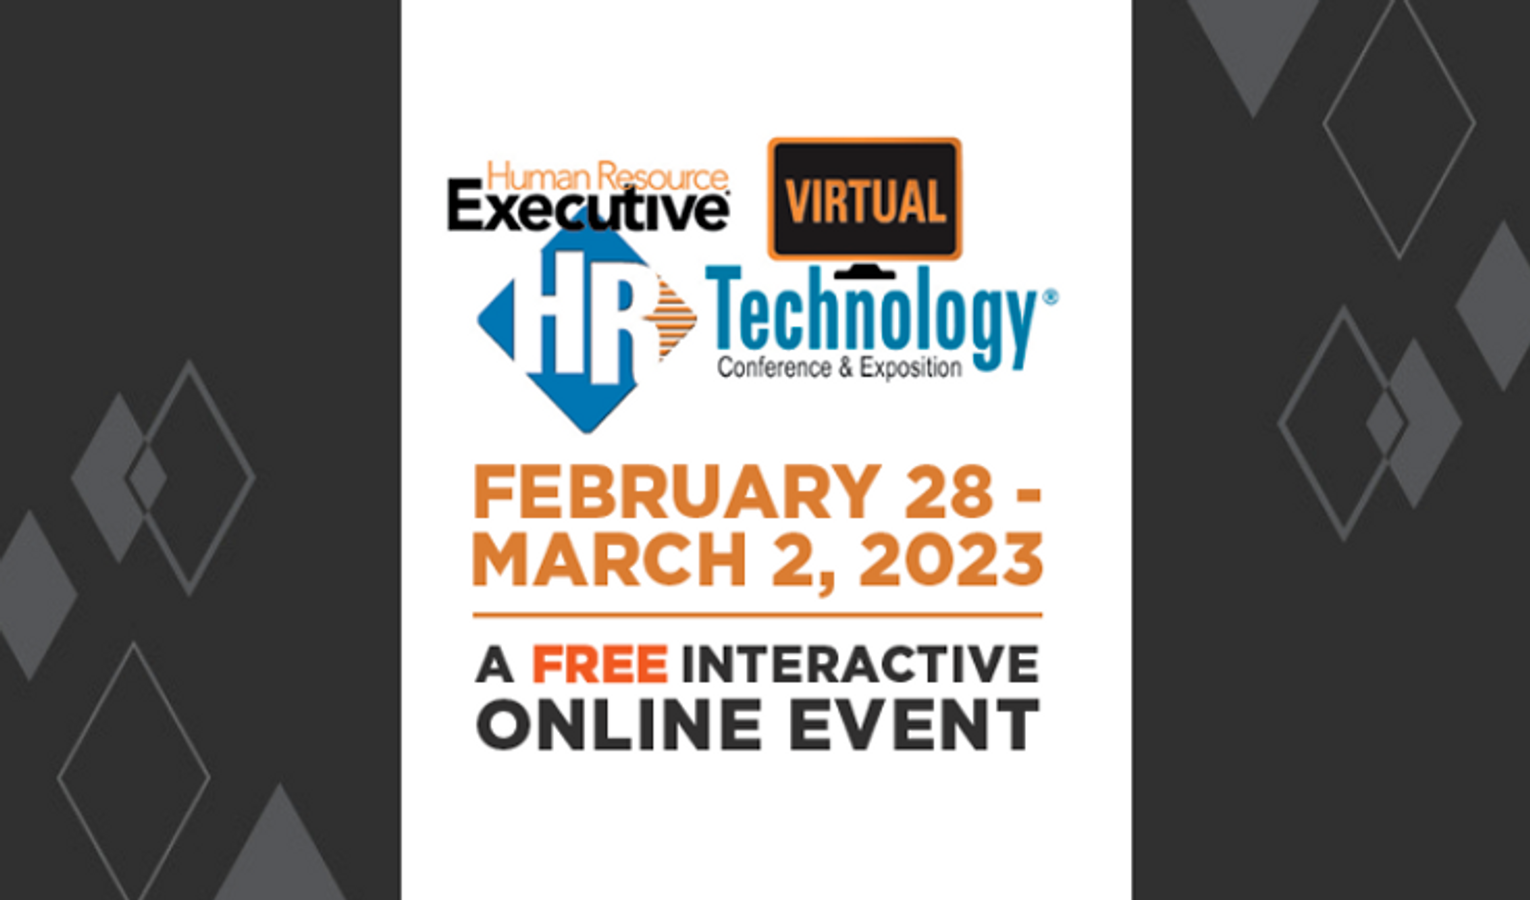 HR Technology Virtual Conference and Exposition, 2023